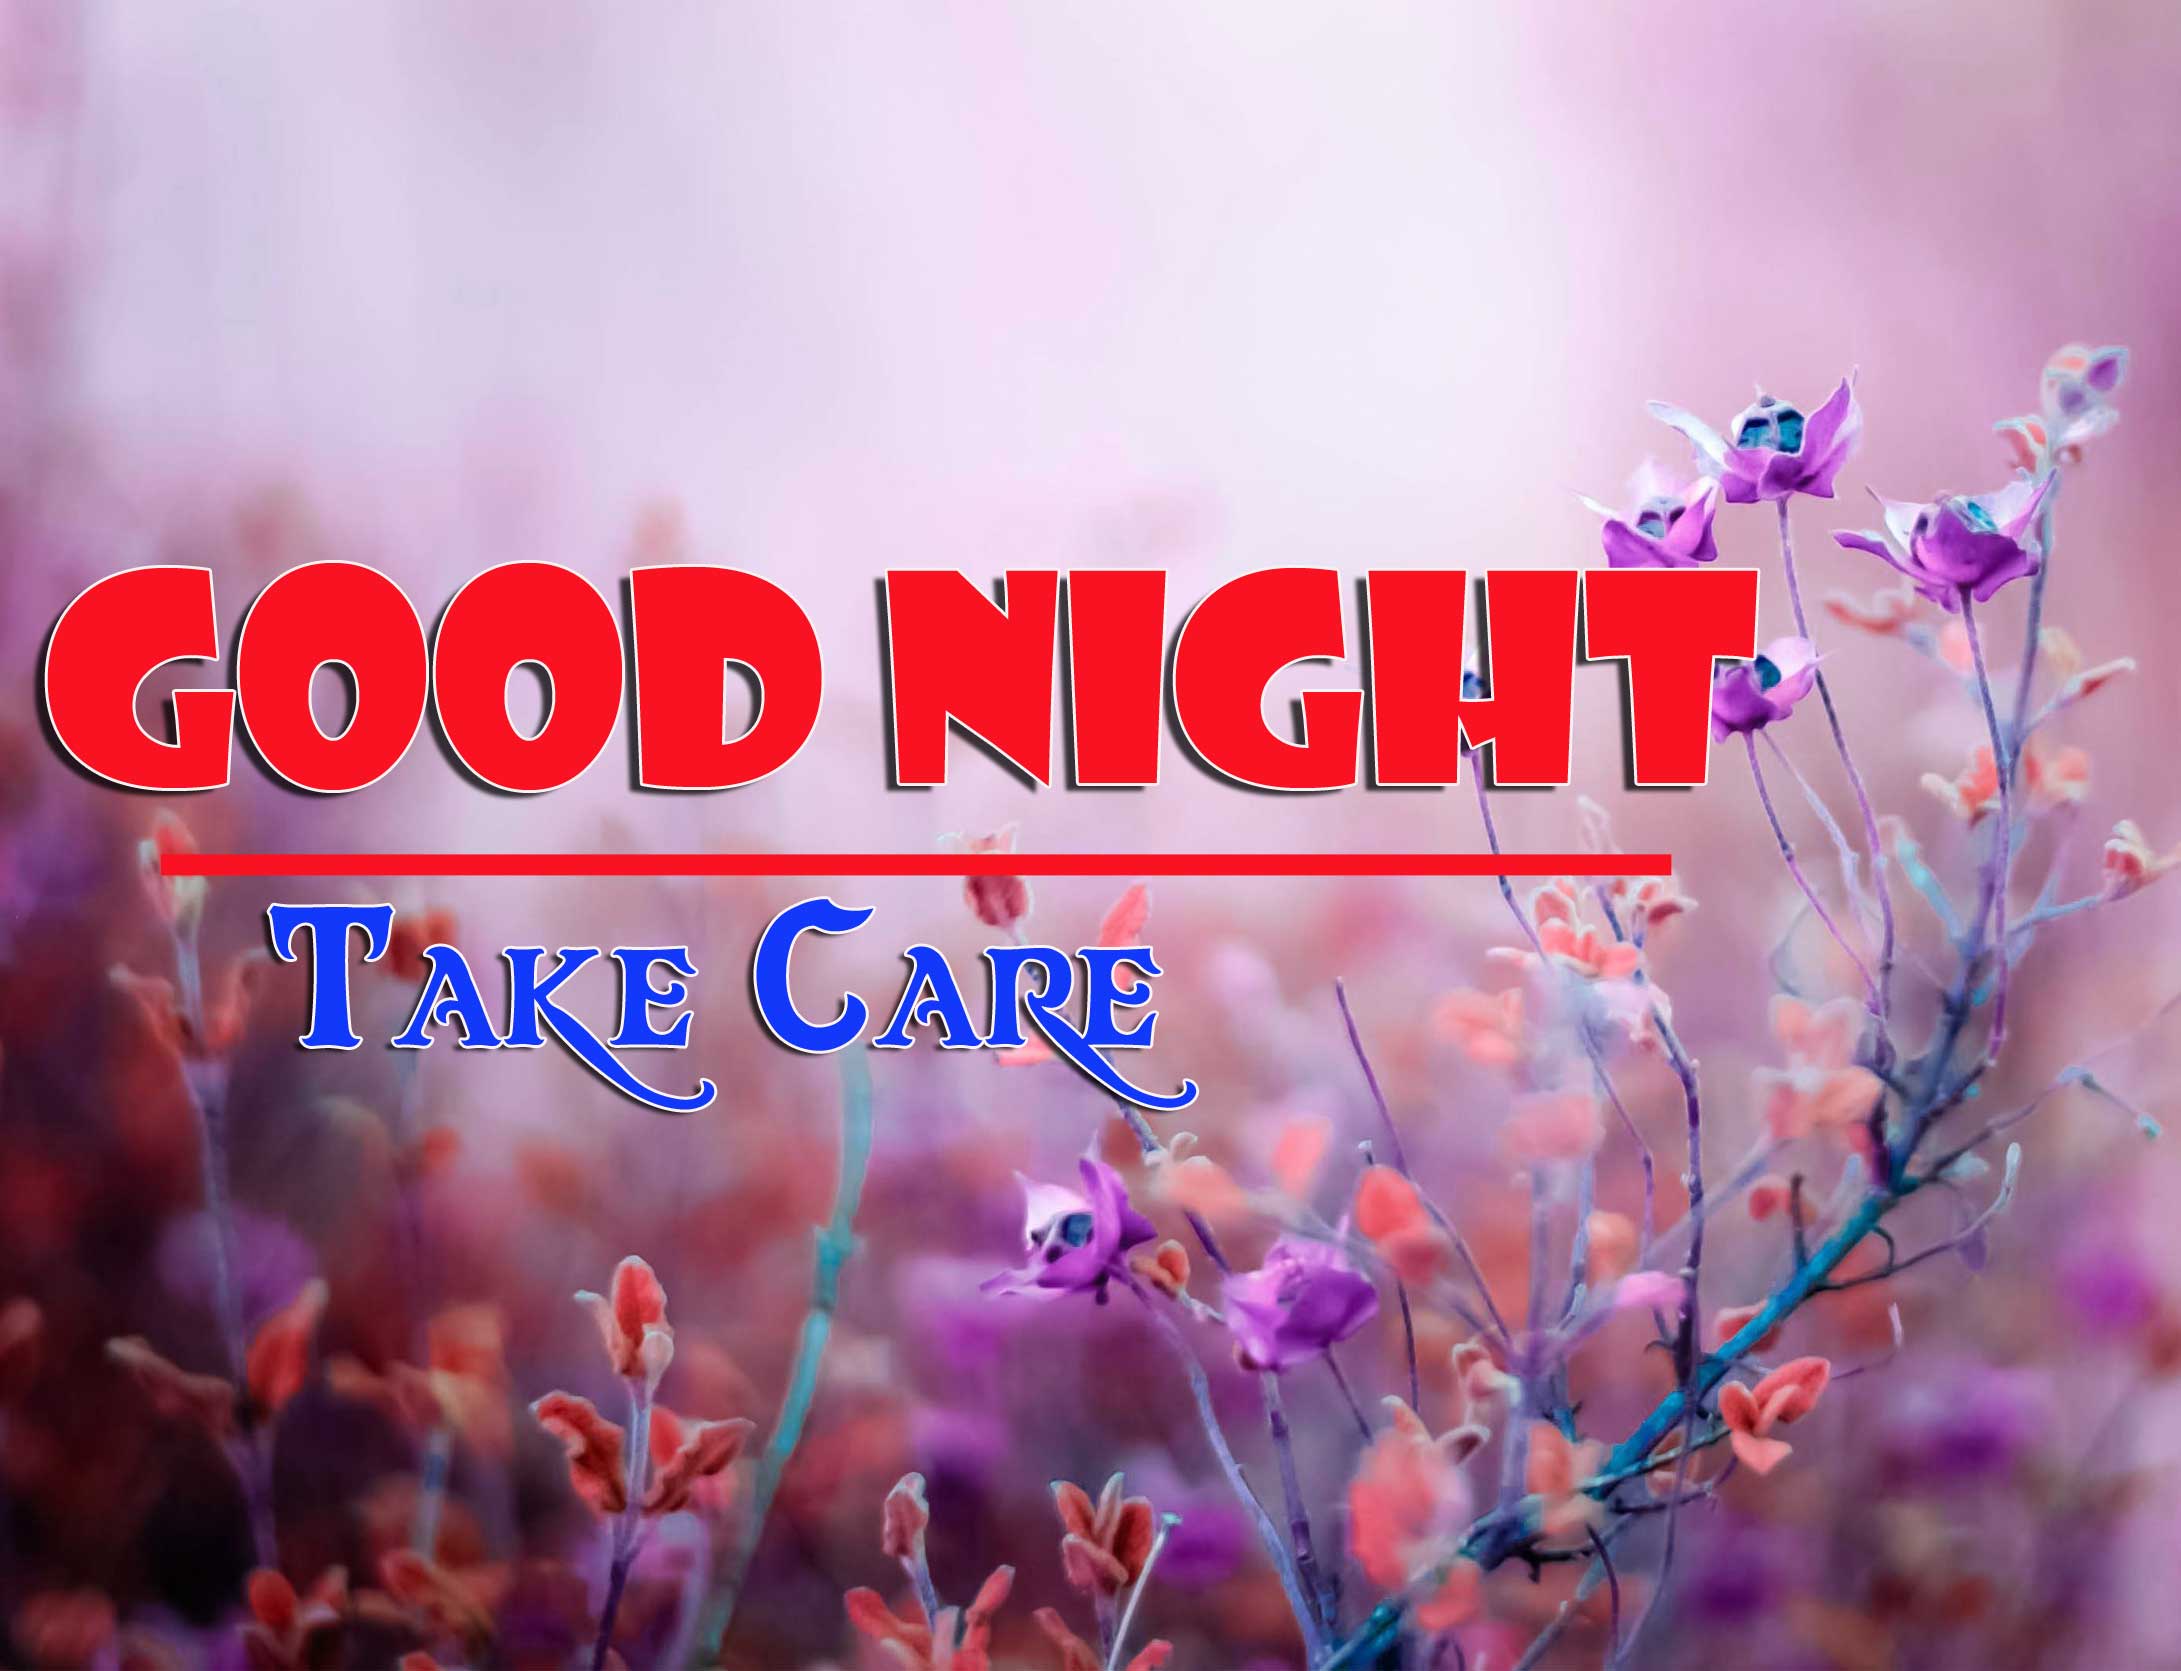 Good Night Wishes Images Wallpaper Download 